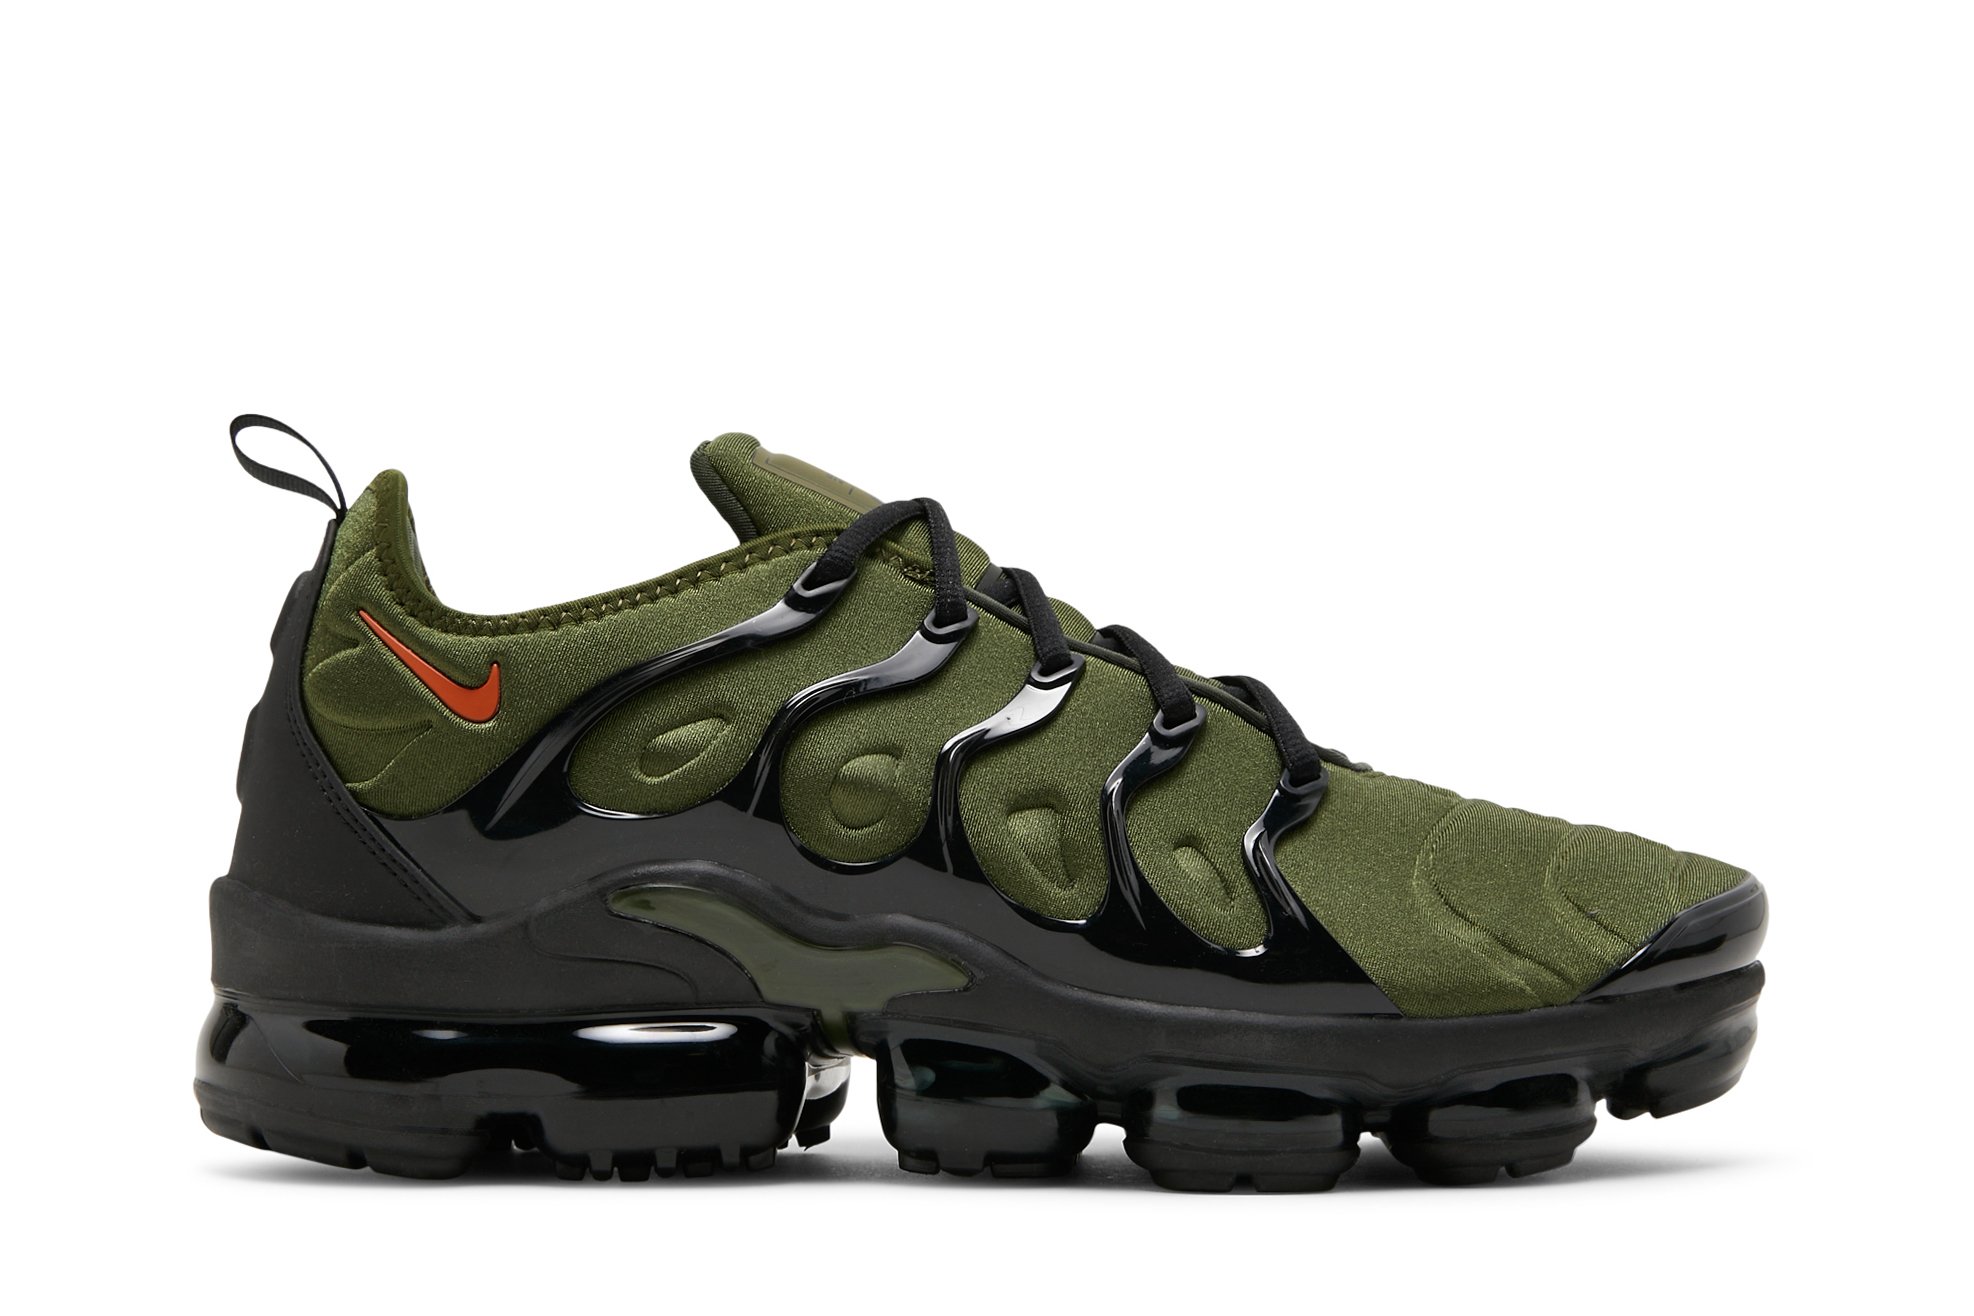 olive green and orange vapormax